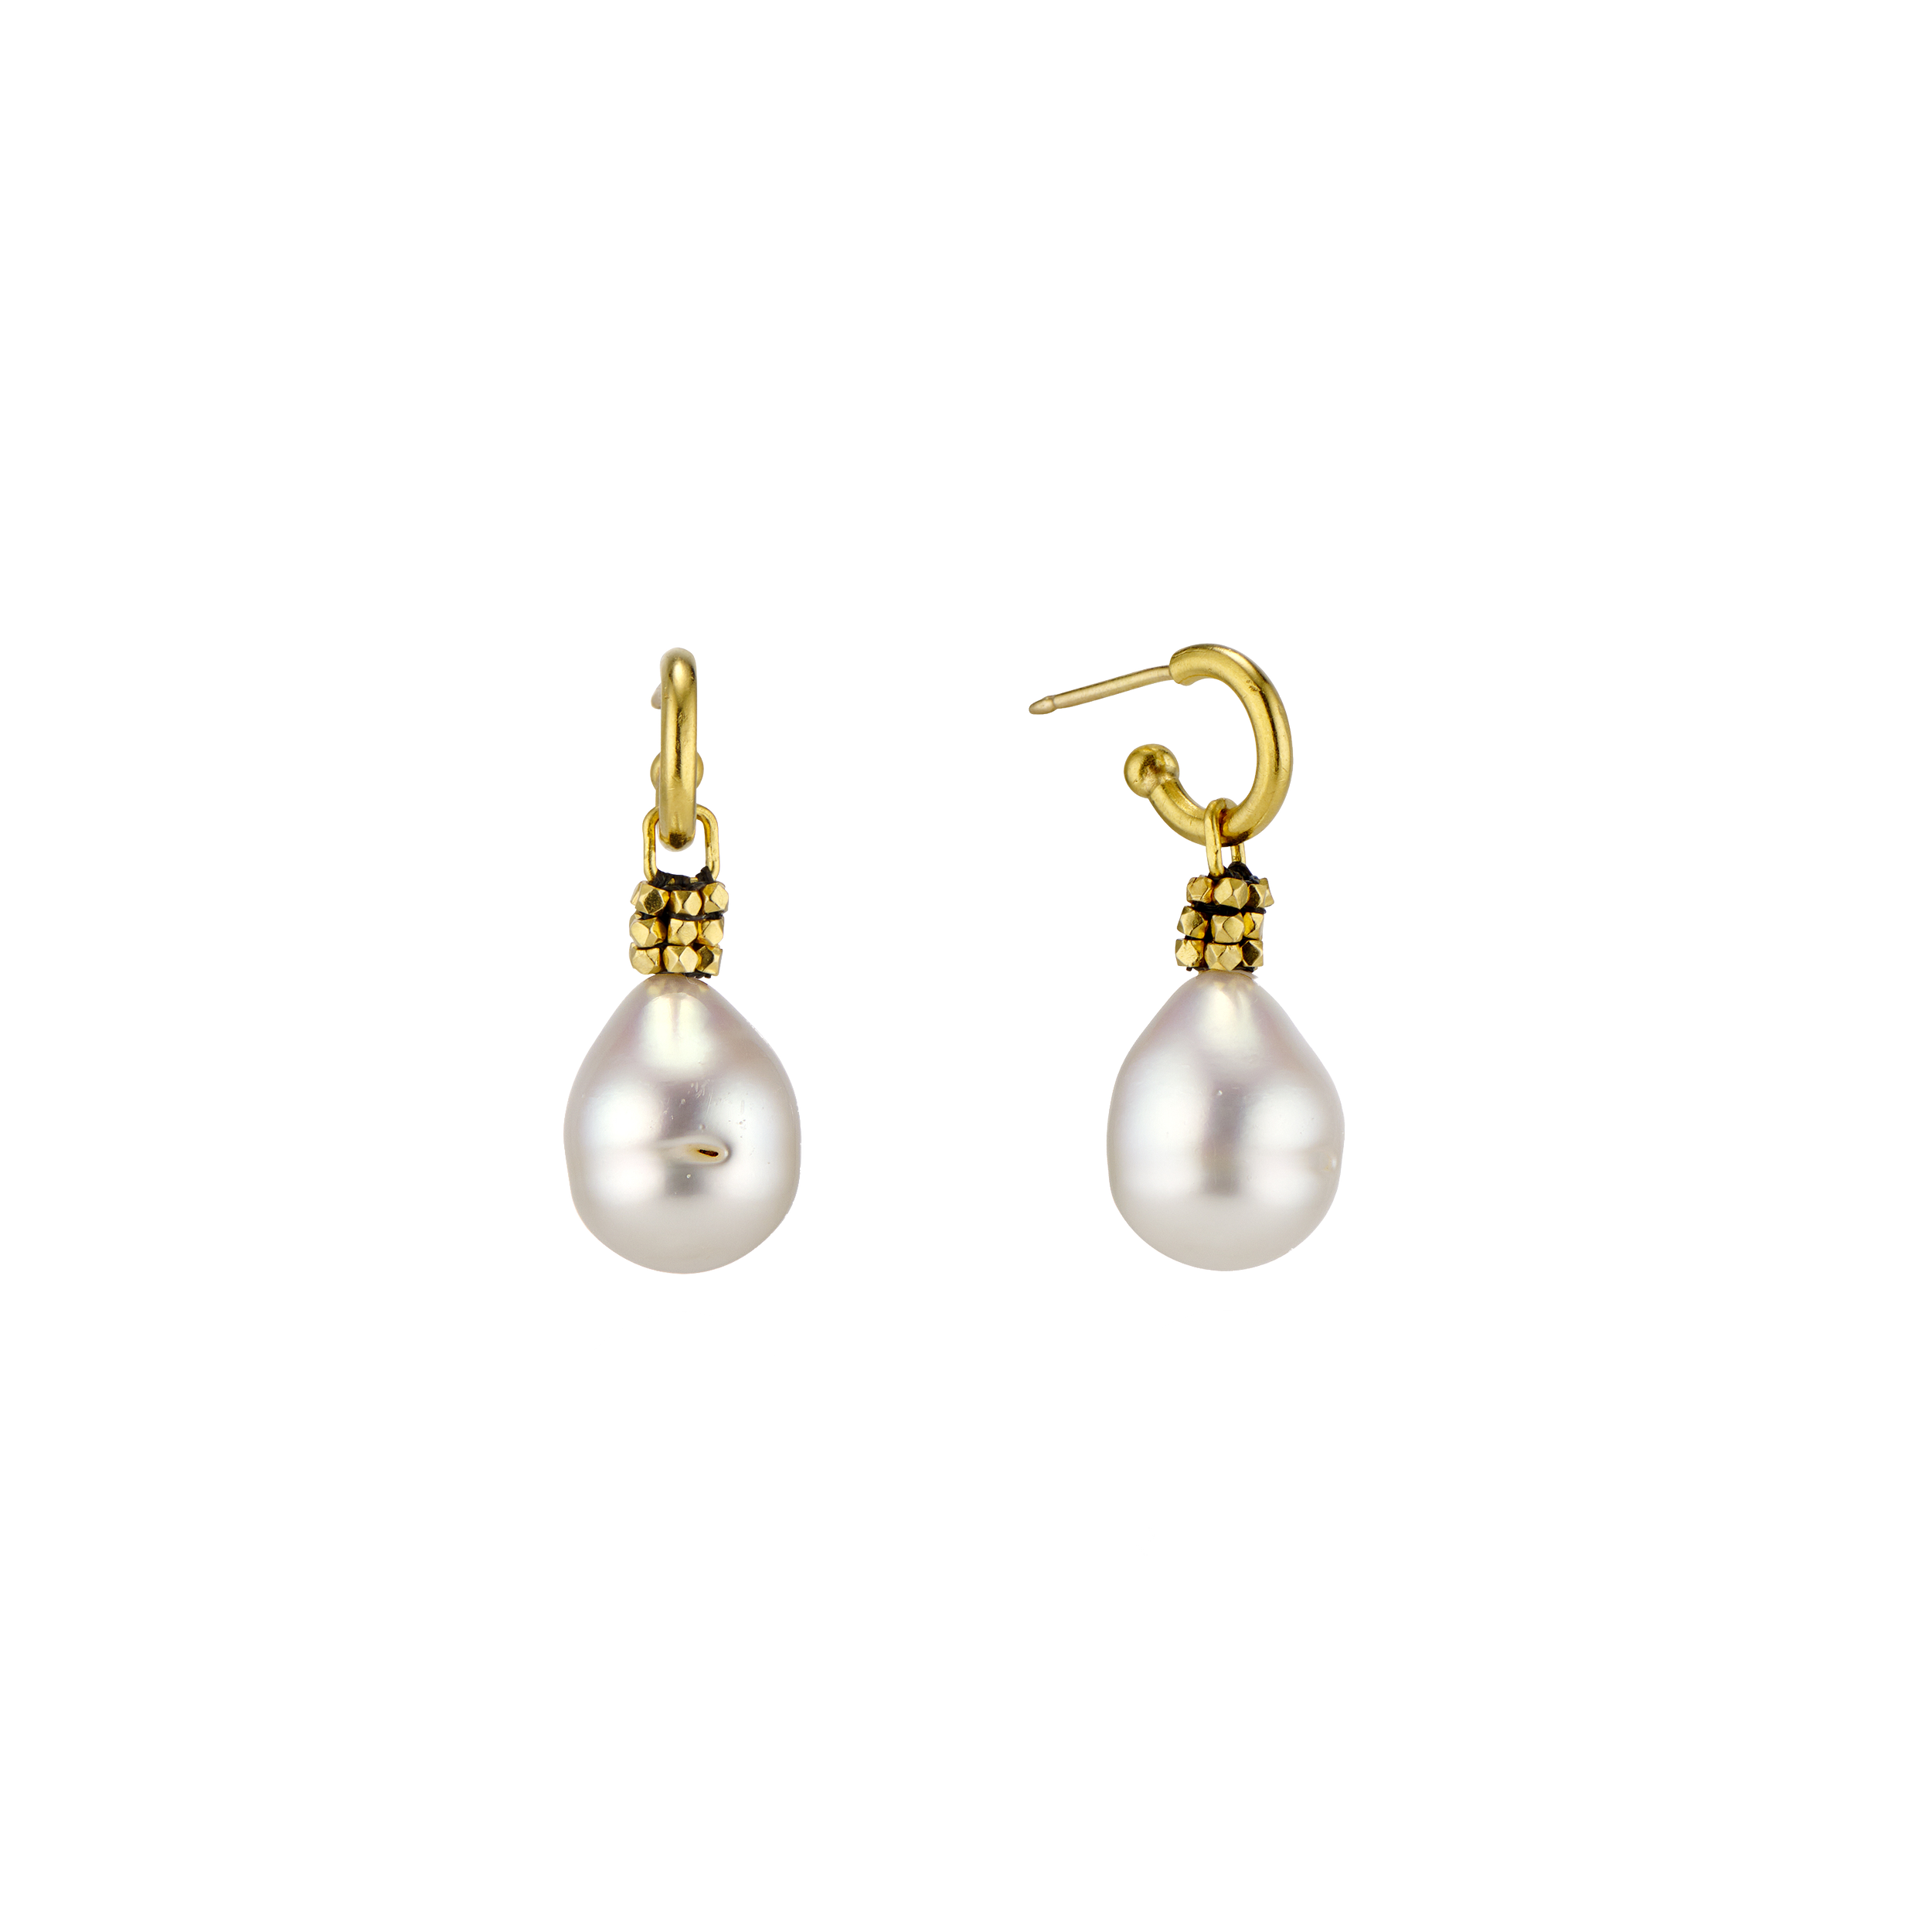 Classic Pearls.  South Sea drop pearls, 20k woven gold beads, hanging on 22k baby hoop earrings.